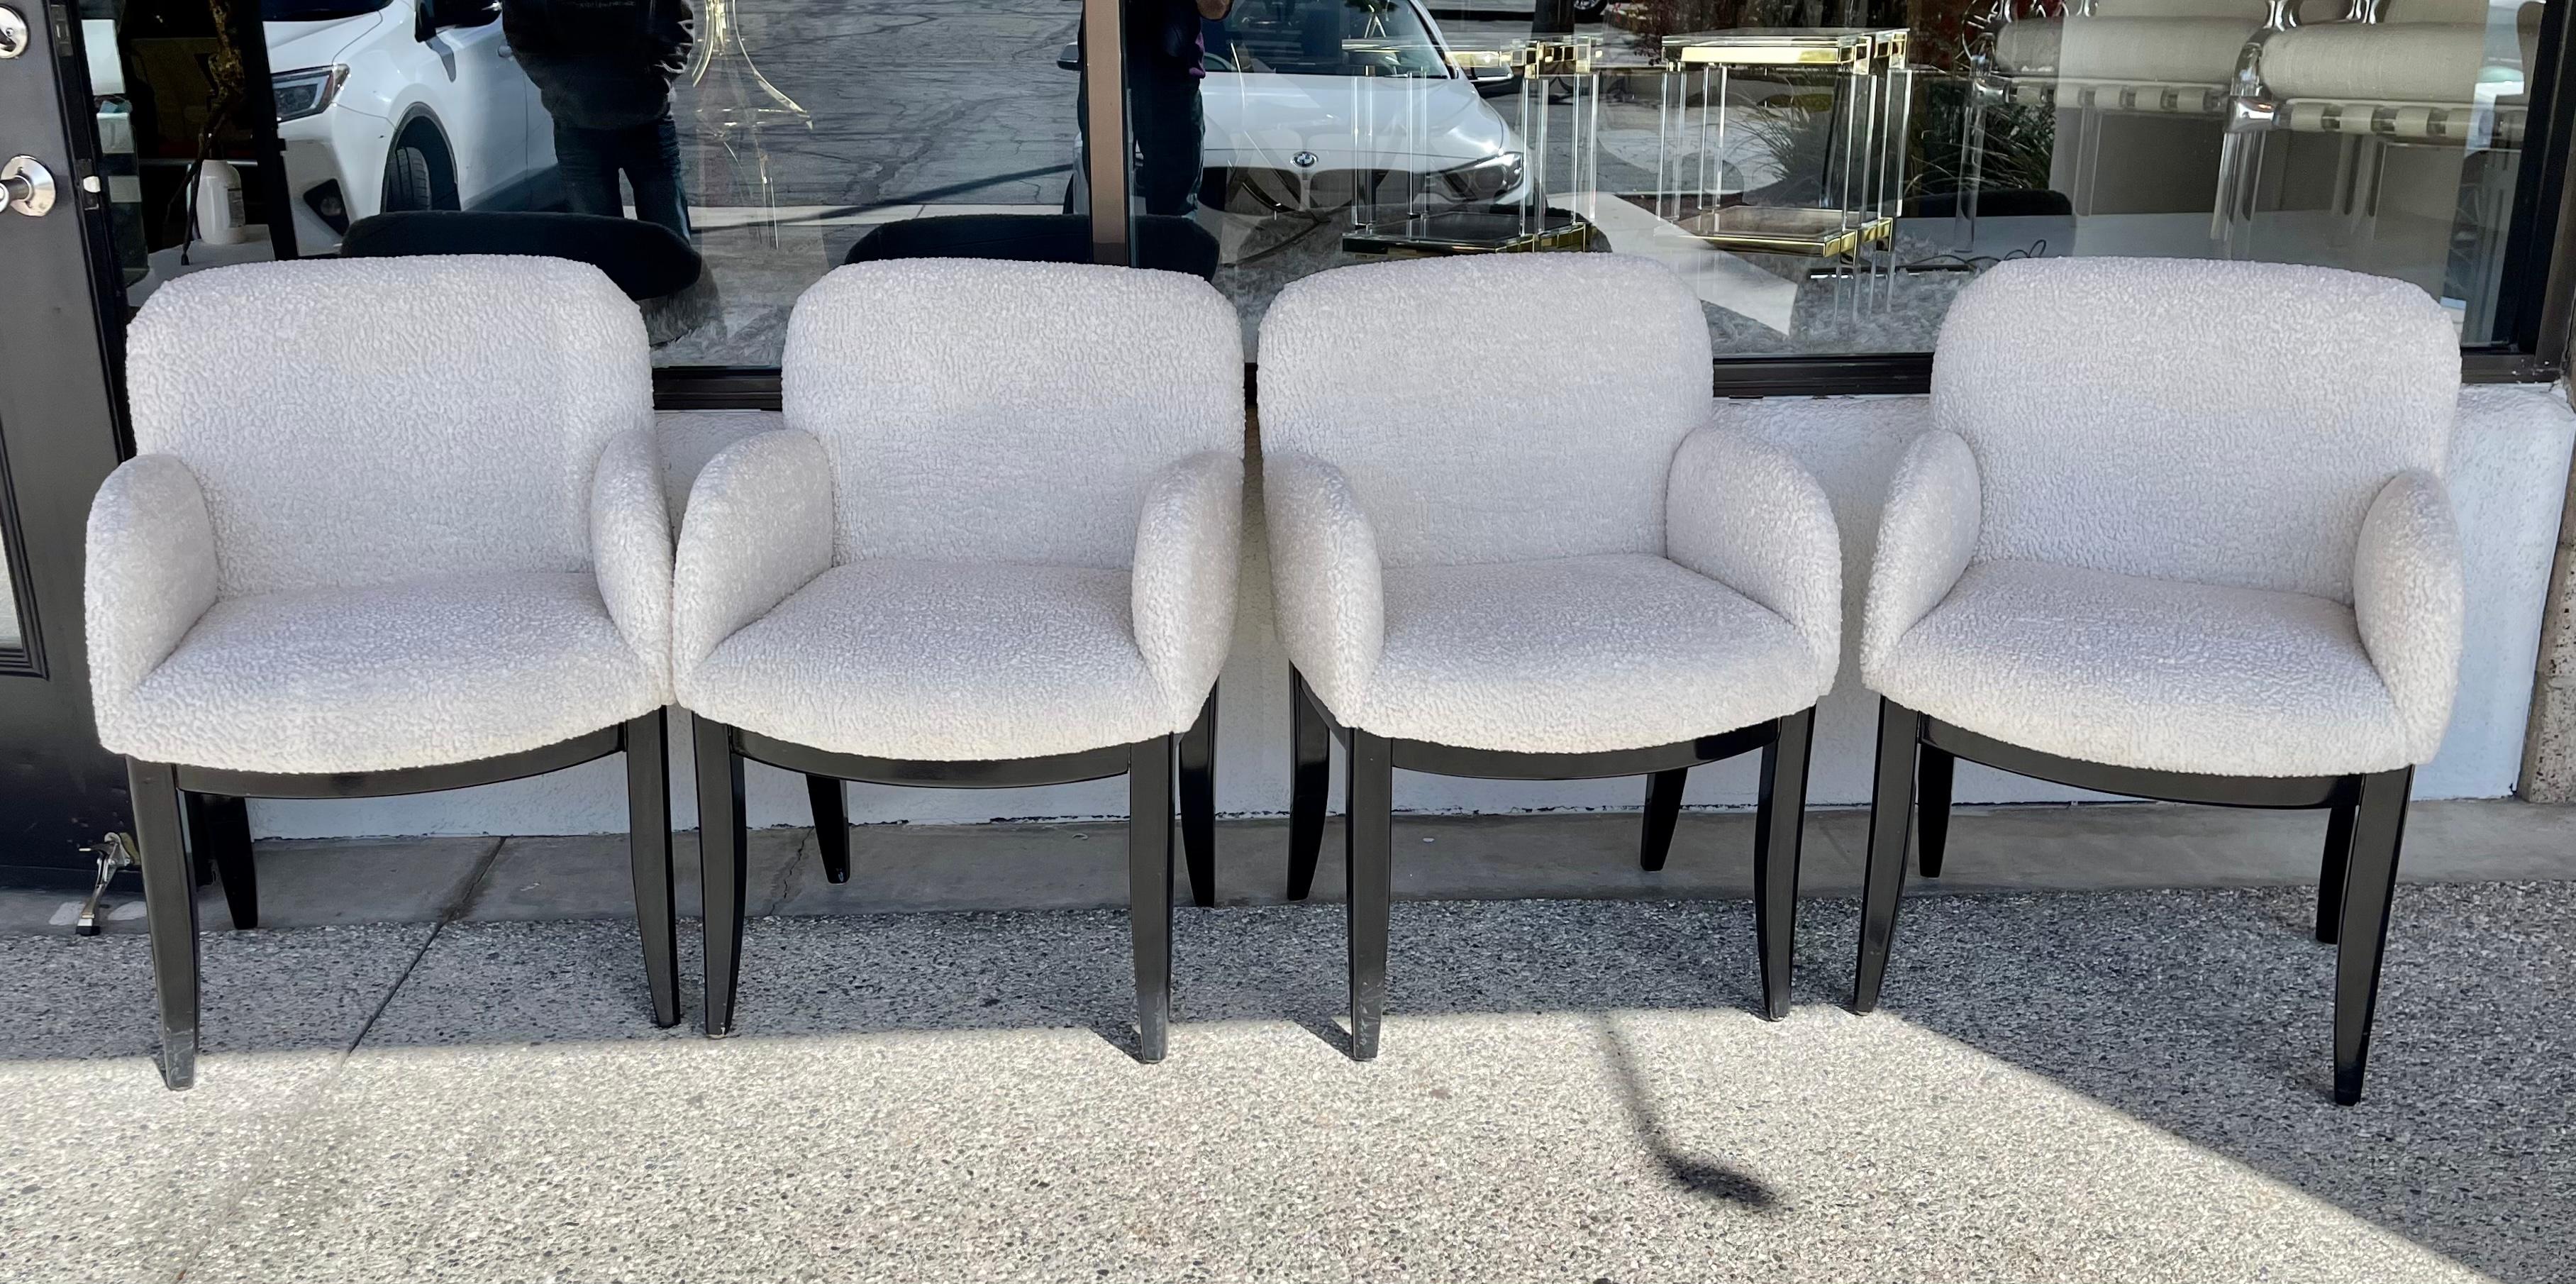 A set of 4 dining chairs designed by Milo Baughman for Thayer Coggin. These have been re-upholstered in a Faux Sheepskin Italian synthetic nubby fabric. The legs are a glossy black. They each have the Thayer Coggin label. Likely from the 1980's. The